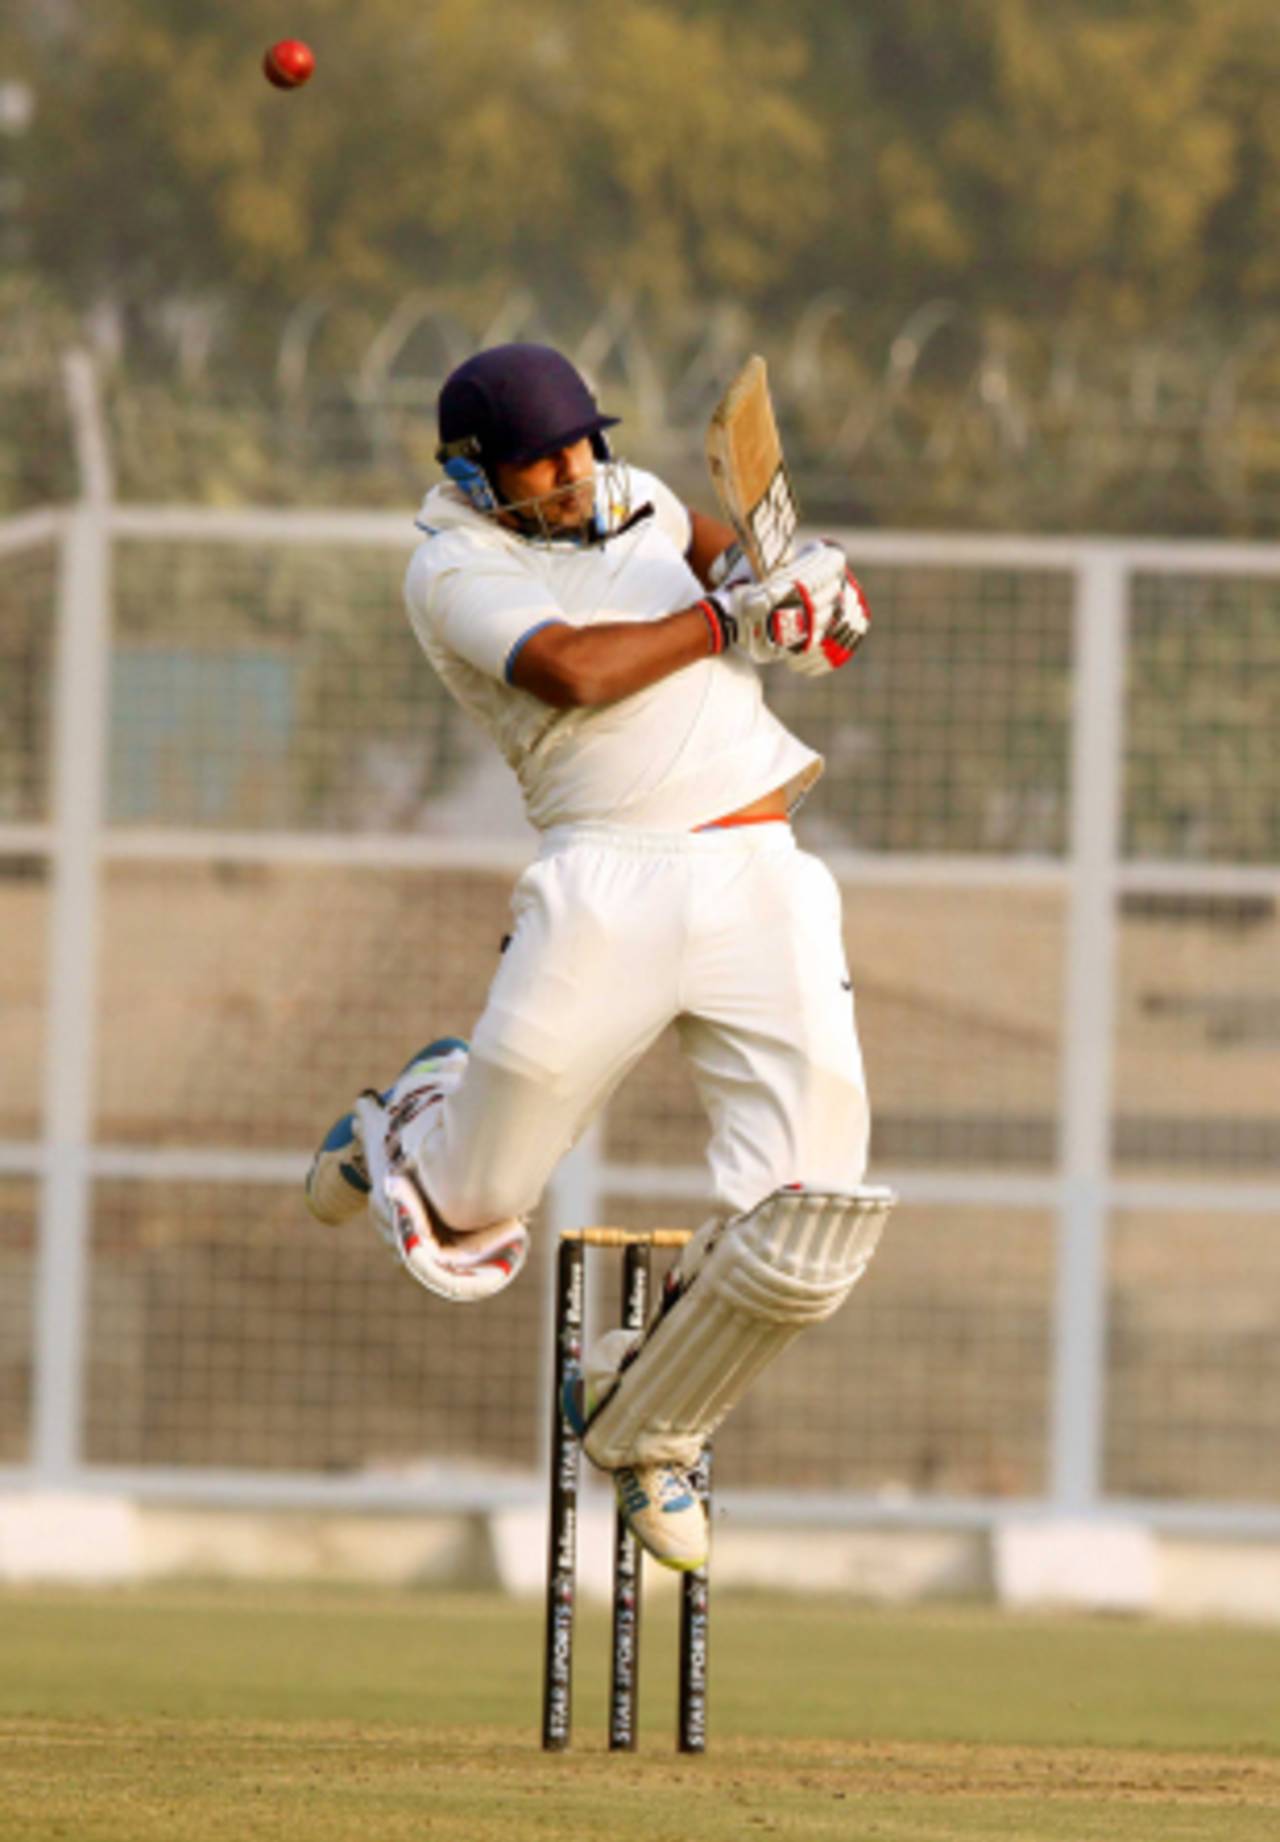 Bounce is good: The current season has brought a welcome shift towards outright results in Ranji Trophy